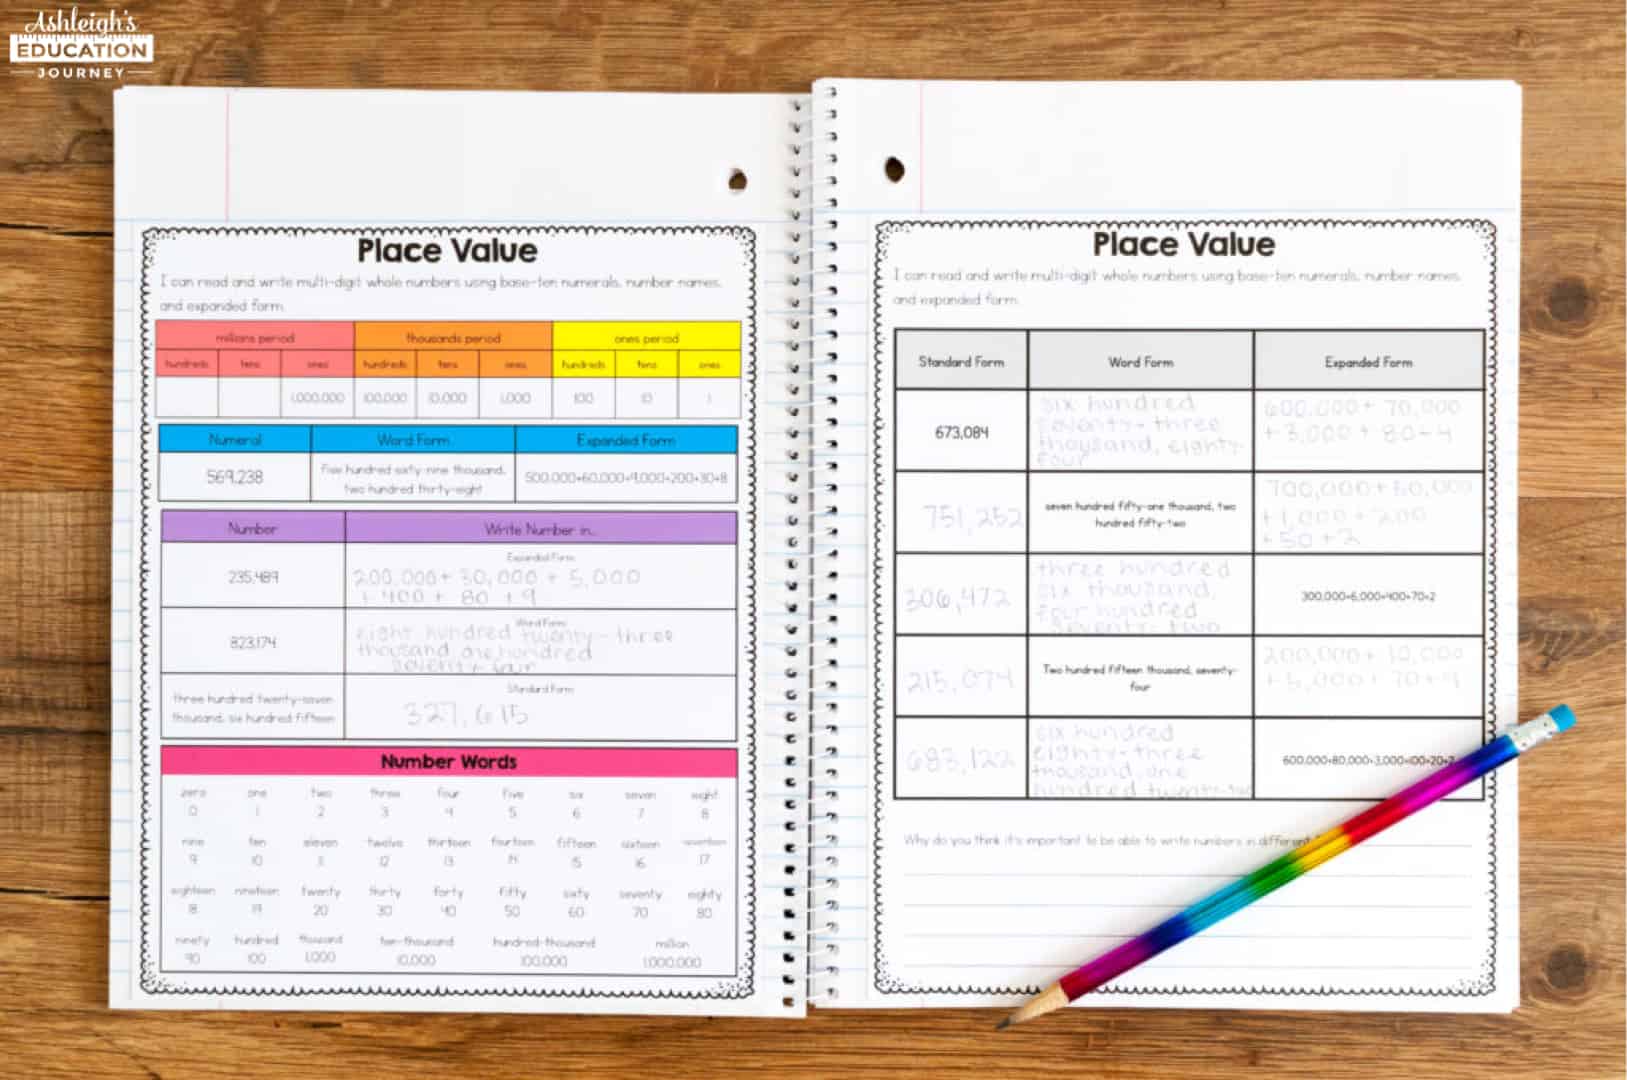 Notebook open to two place value worksheets with a rainbow-colored pencil laying on top